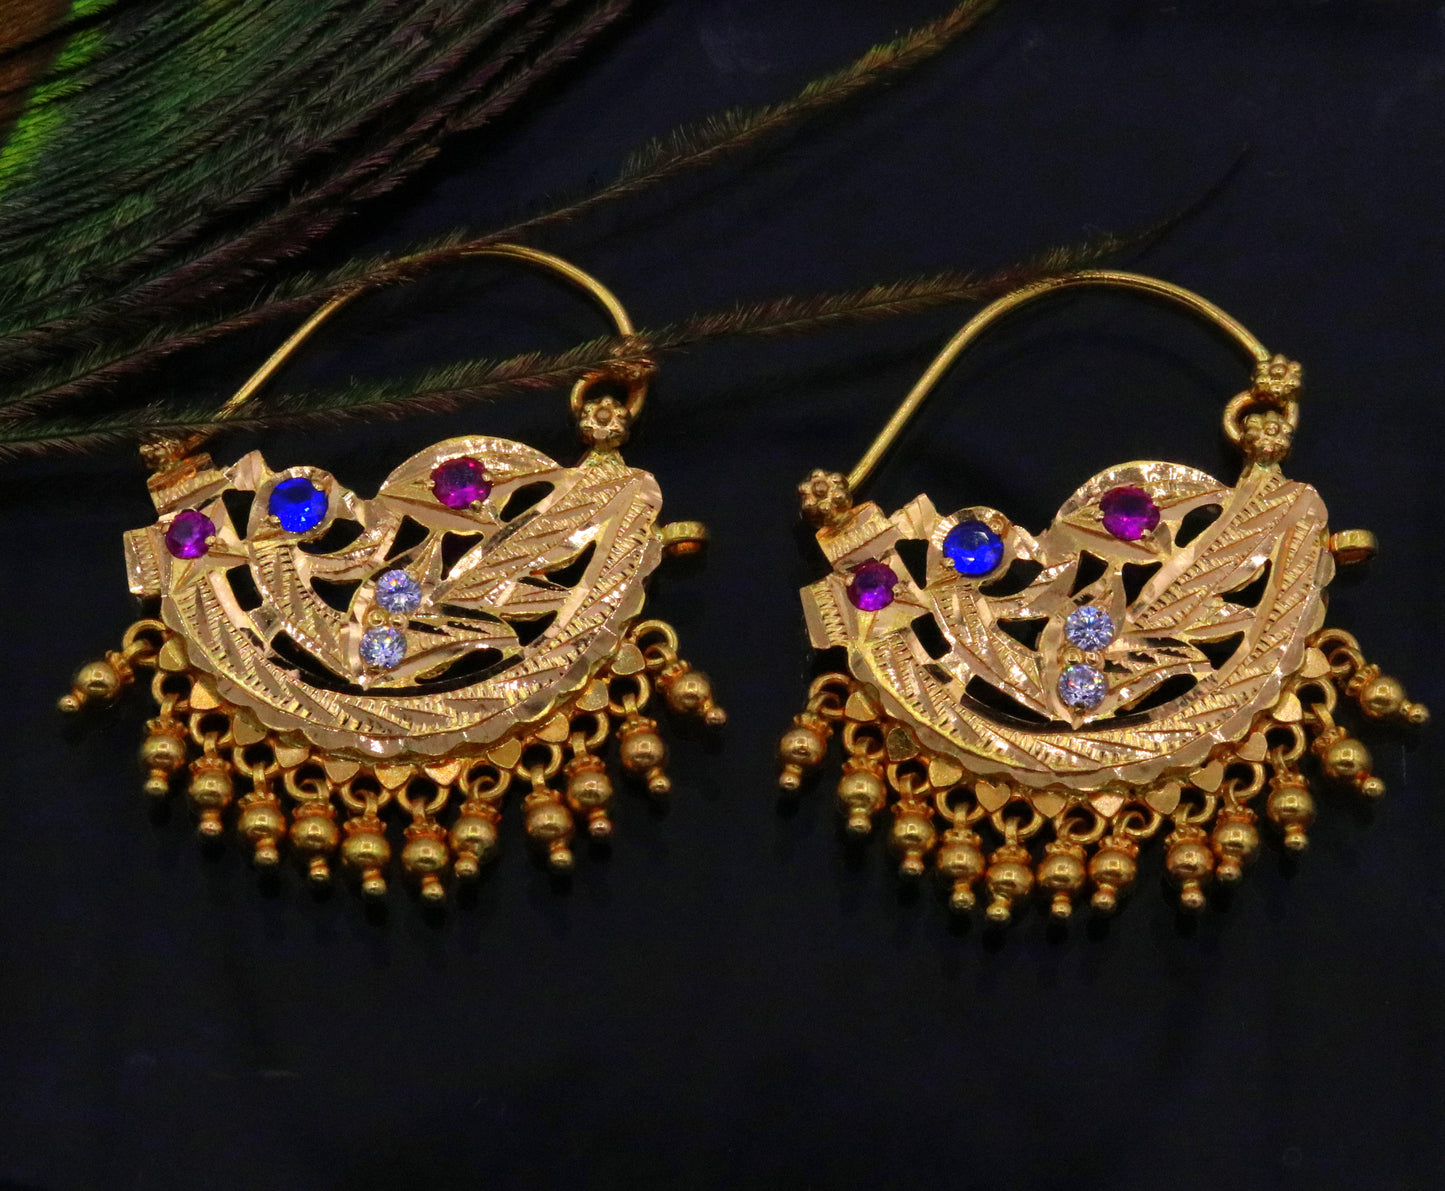 vintage antique handmade 22karat yellow gold solid tribal style hanging bells earrings hoops india jewelry - TRIBAL ORNAMENTS